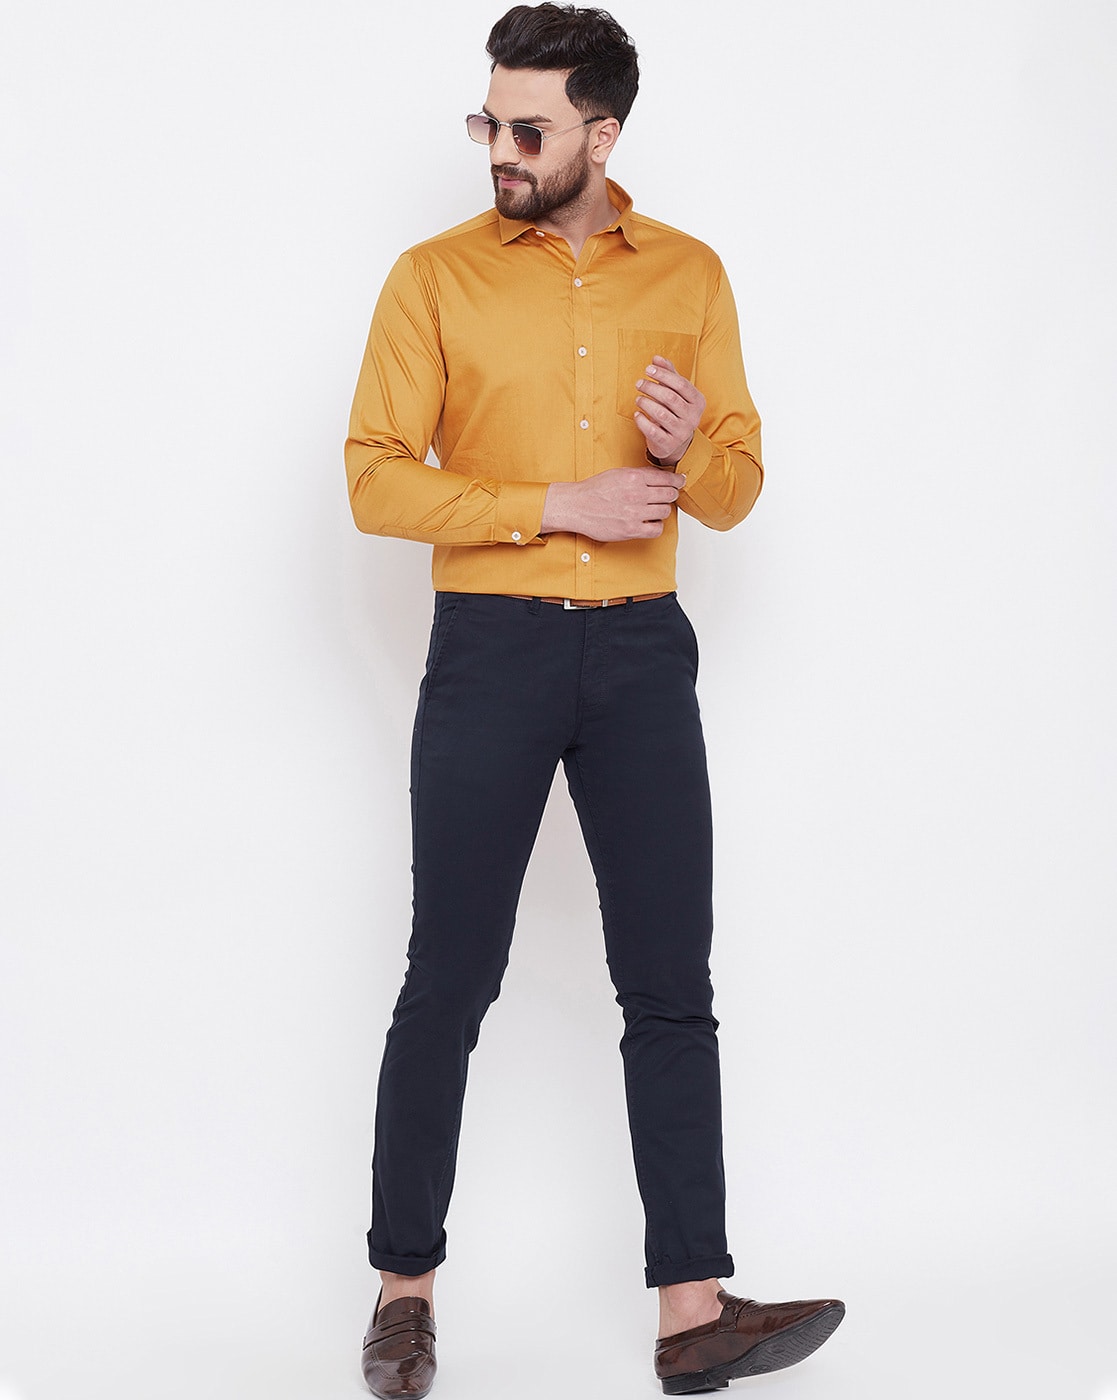 What colour shirt will be perfect for cream trousers? - Quora